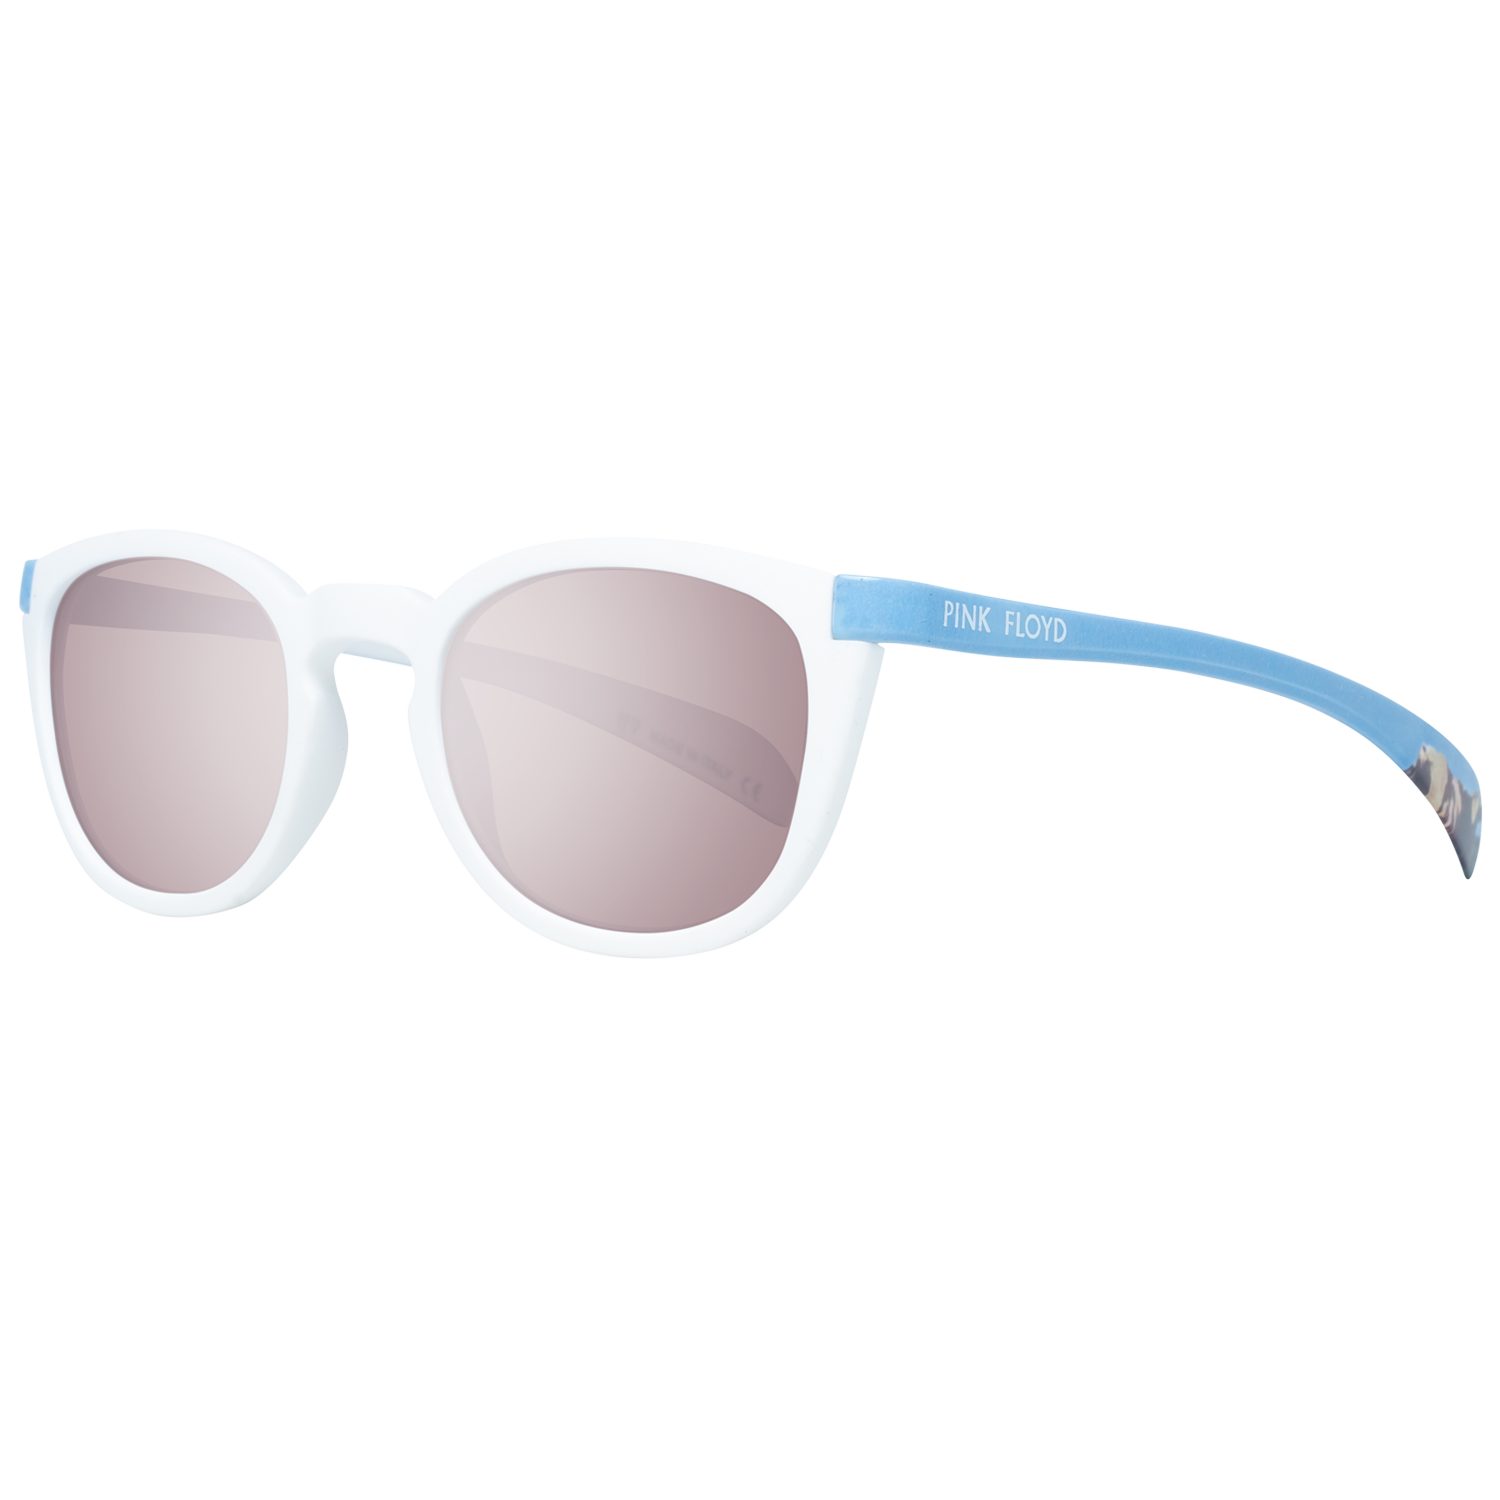 Try Cover Change Sonnenbrille TS503 4802